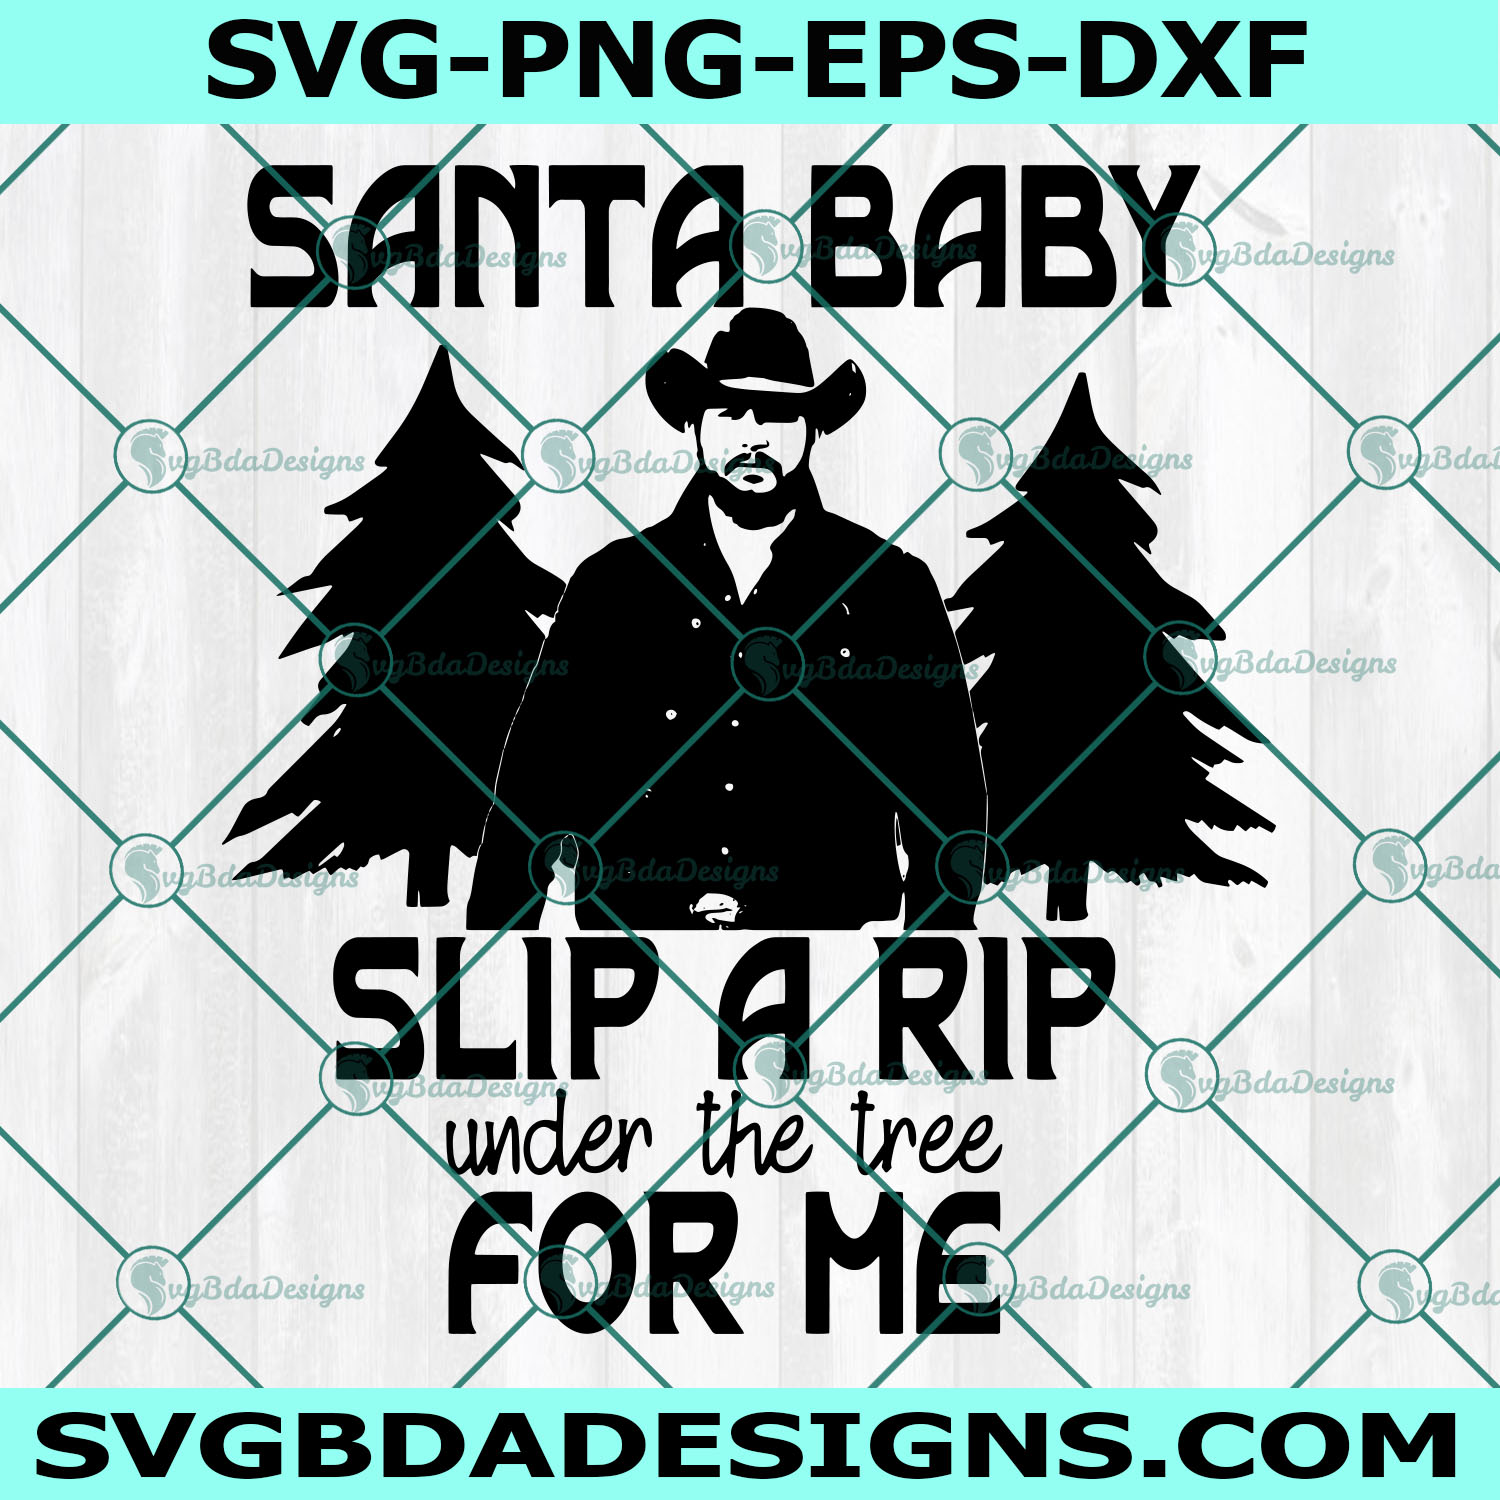 Santa Baby Slip a RIP under the tree for me Svg, Christmas Svg, Yellowstone Svg , Cricut, Digital Download